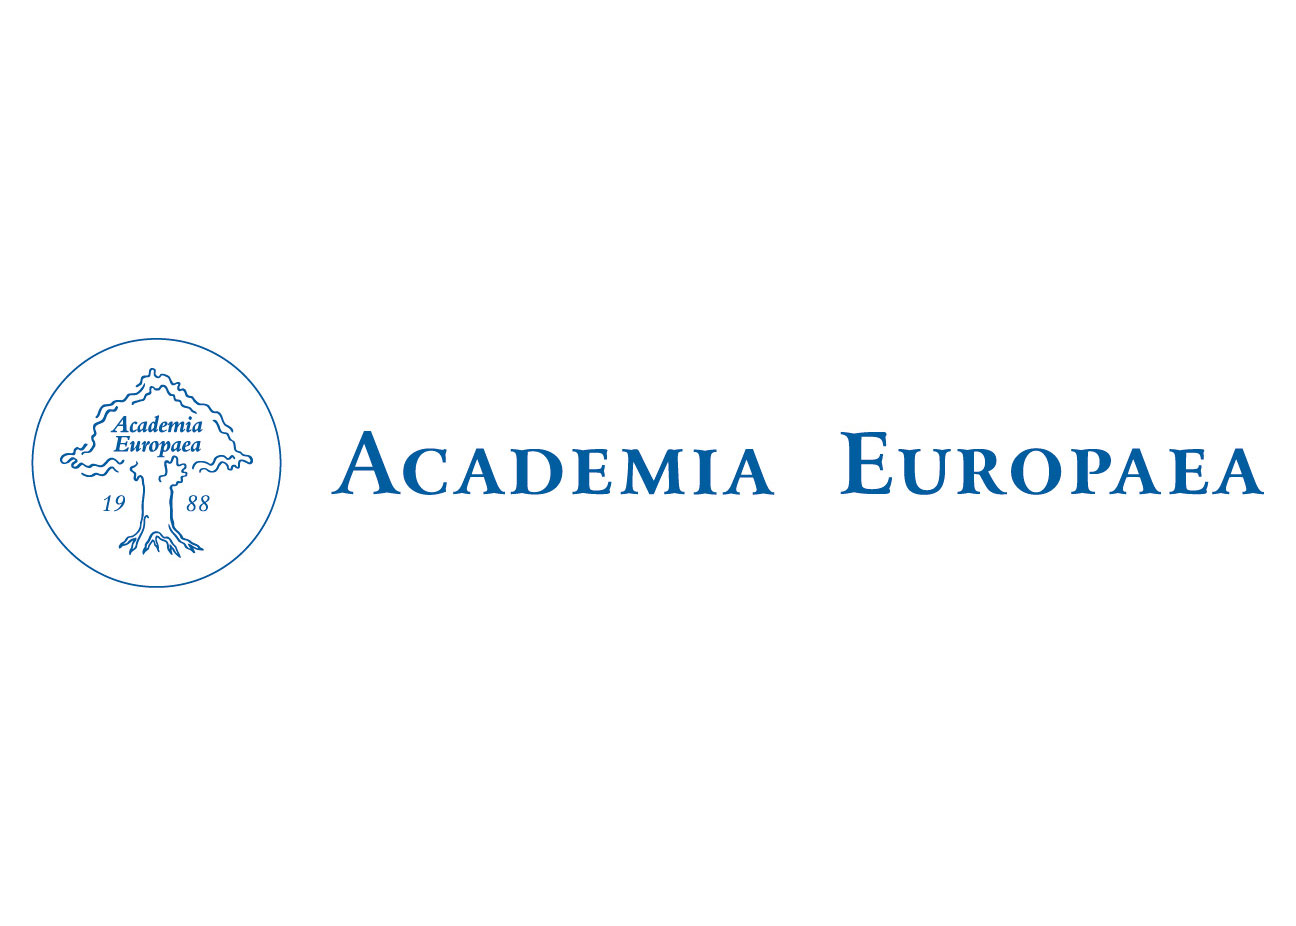 Stéphane NOSELLI is elected Member of Academia Europaea